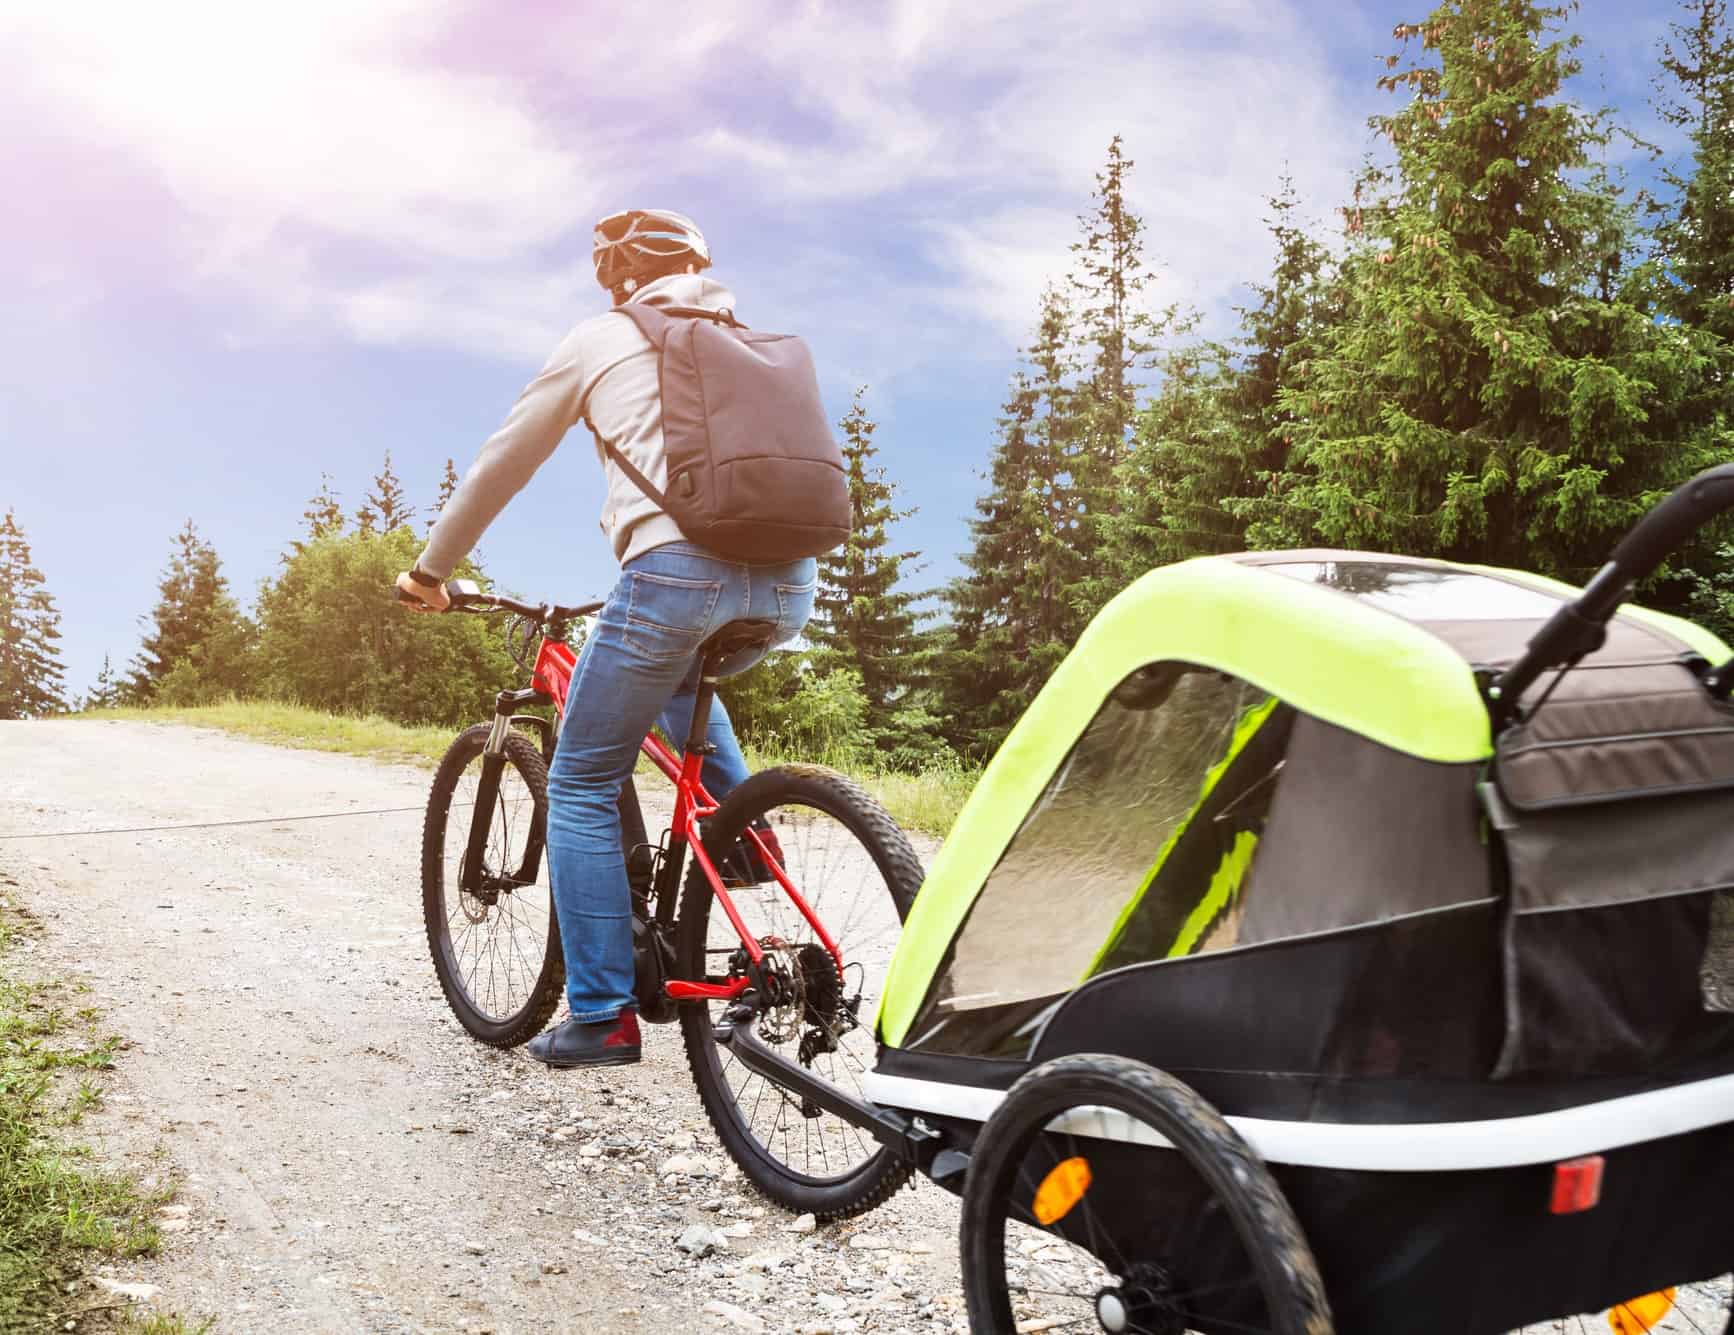 Father With Child In Trailer Riding Mountain Bike In Alps